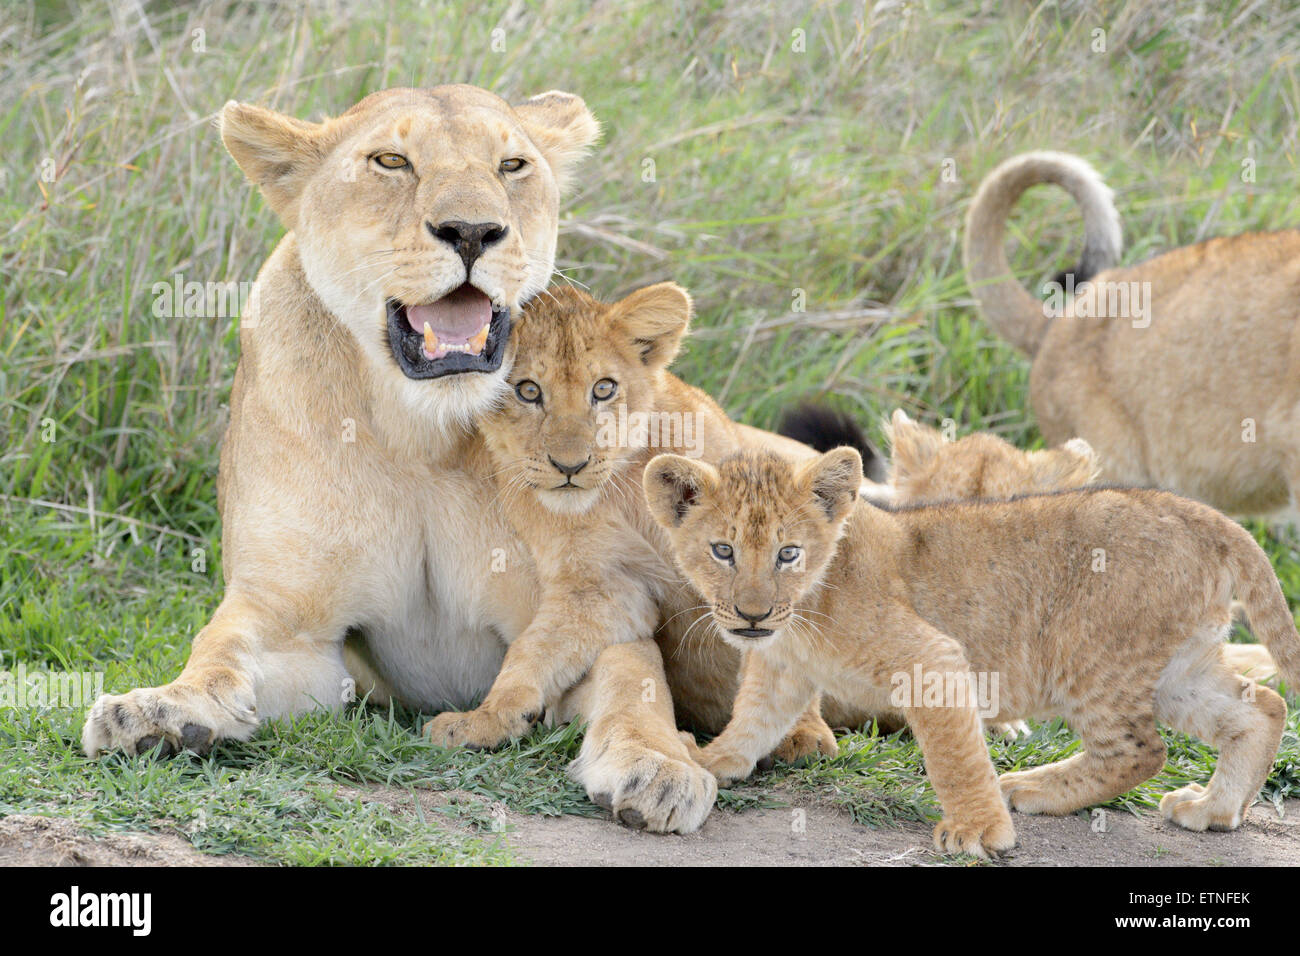 Lion cubs (Panthera leo) playing with lioness mother on the savanna, Serengeti national park, Tanzania. Stock Photo